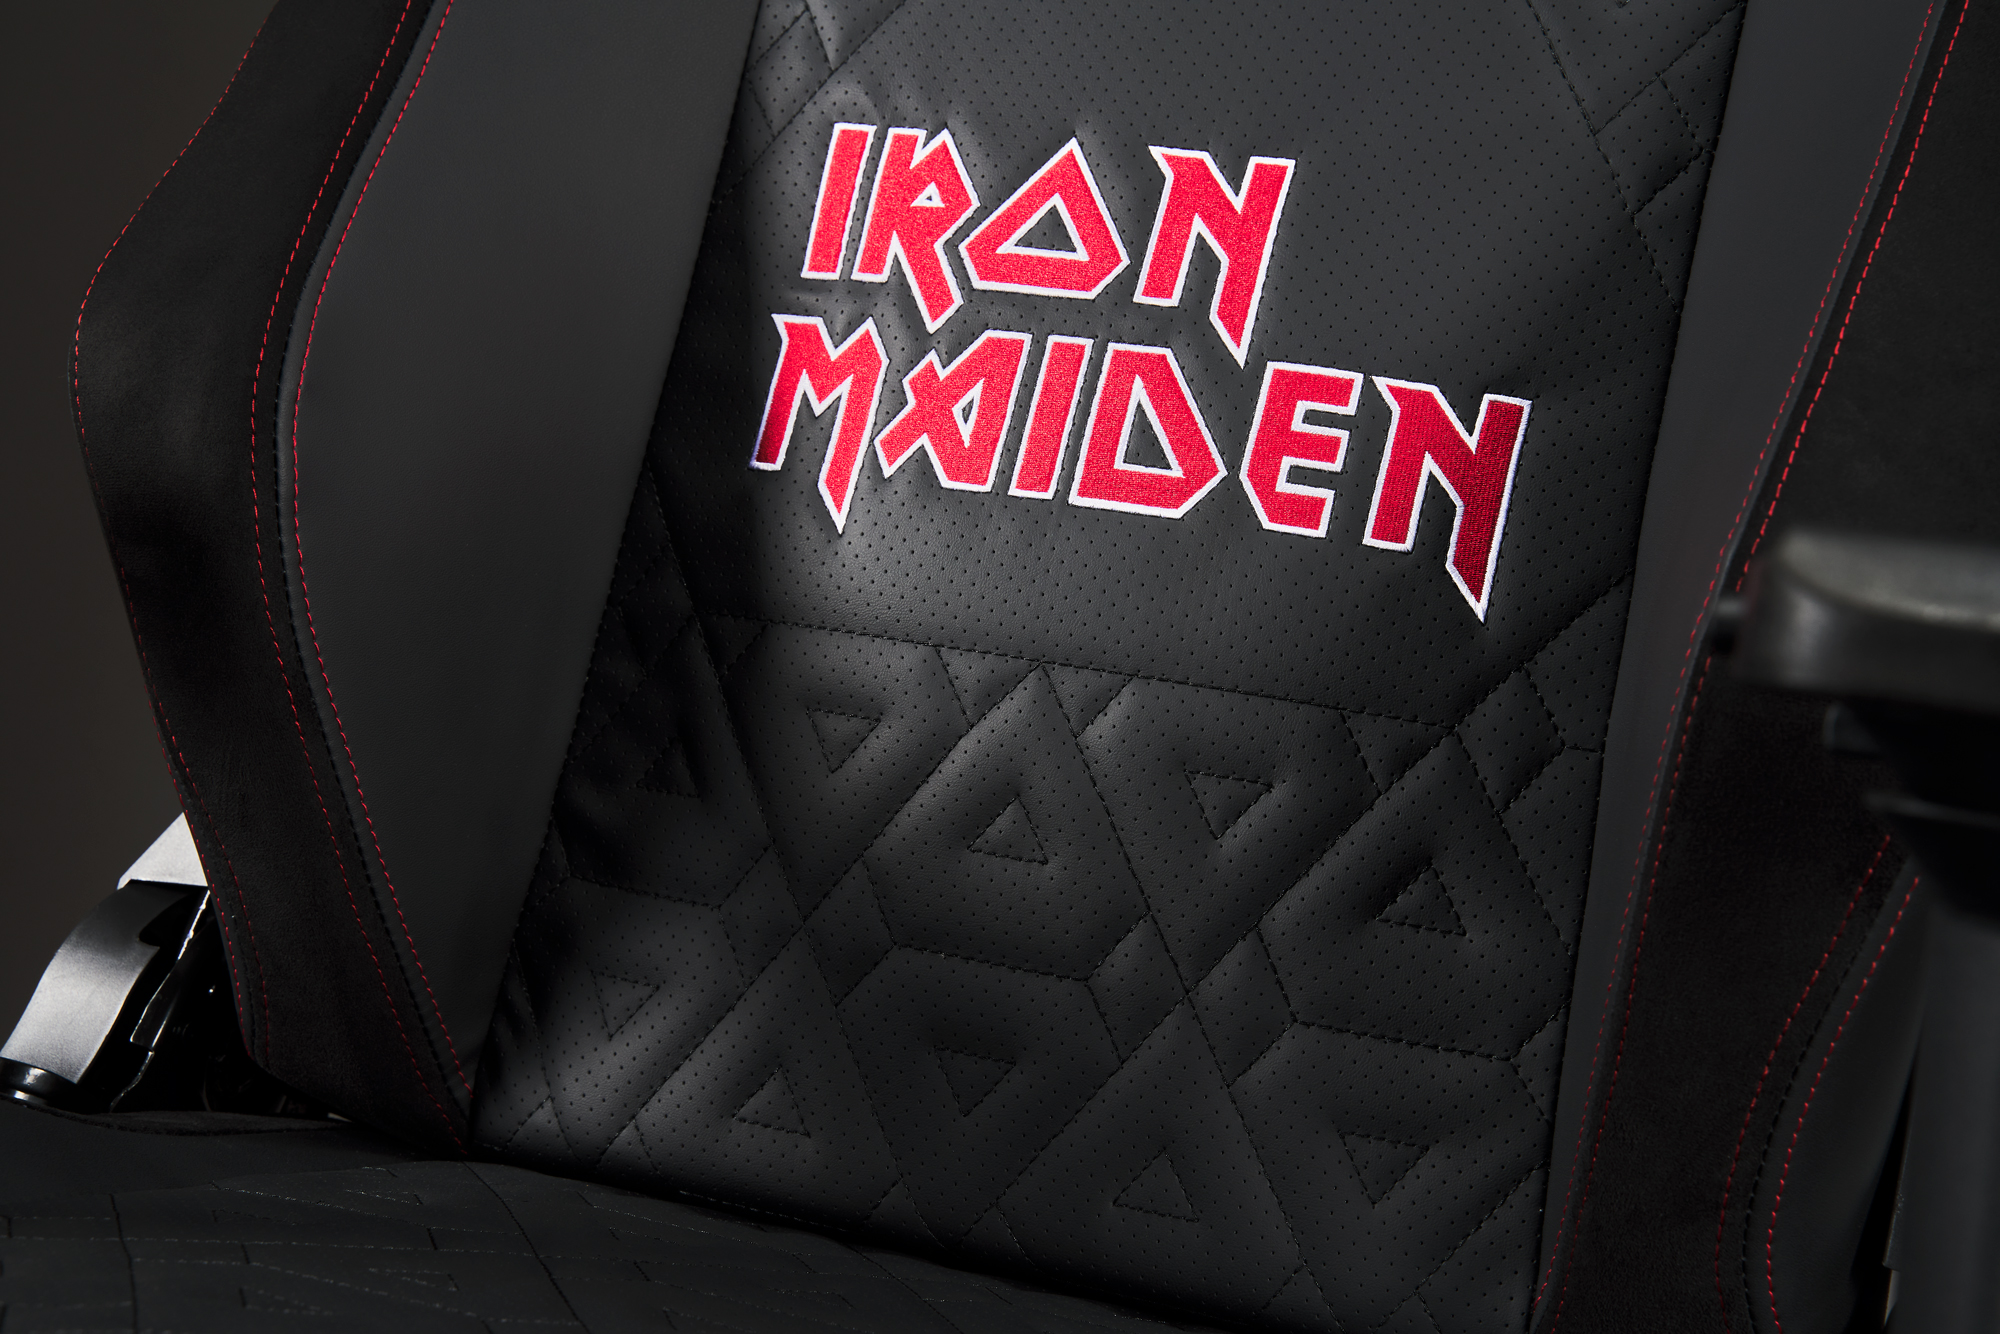 Gaming-Stuhl Apollon Collector Iron Maiden | Iconic by Subsonic 